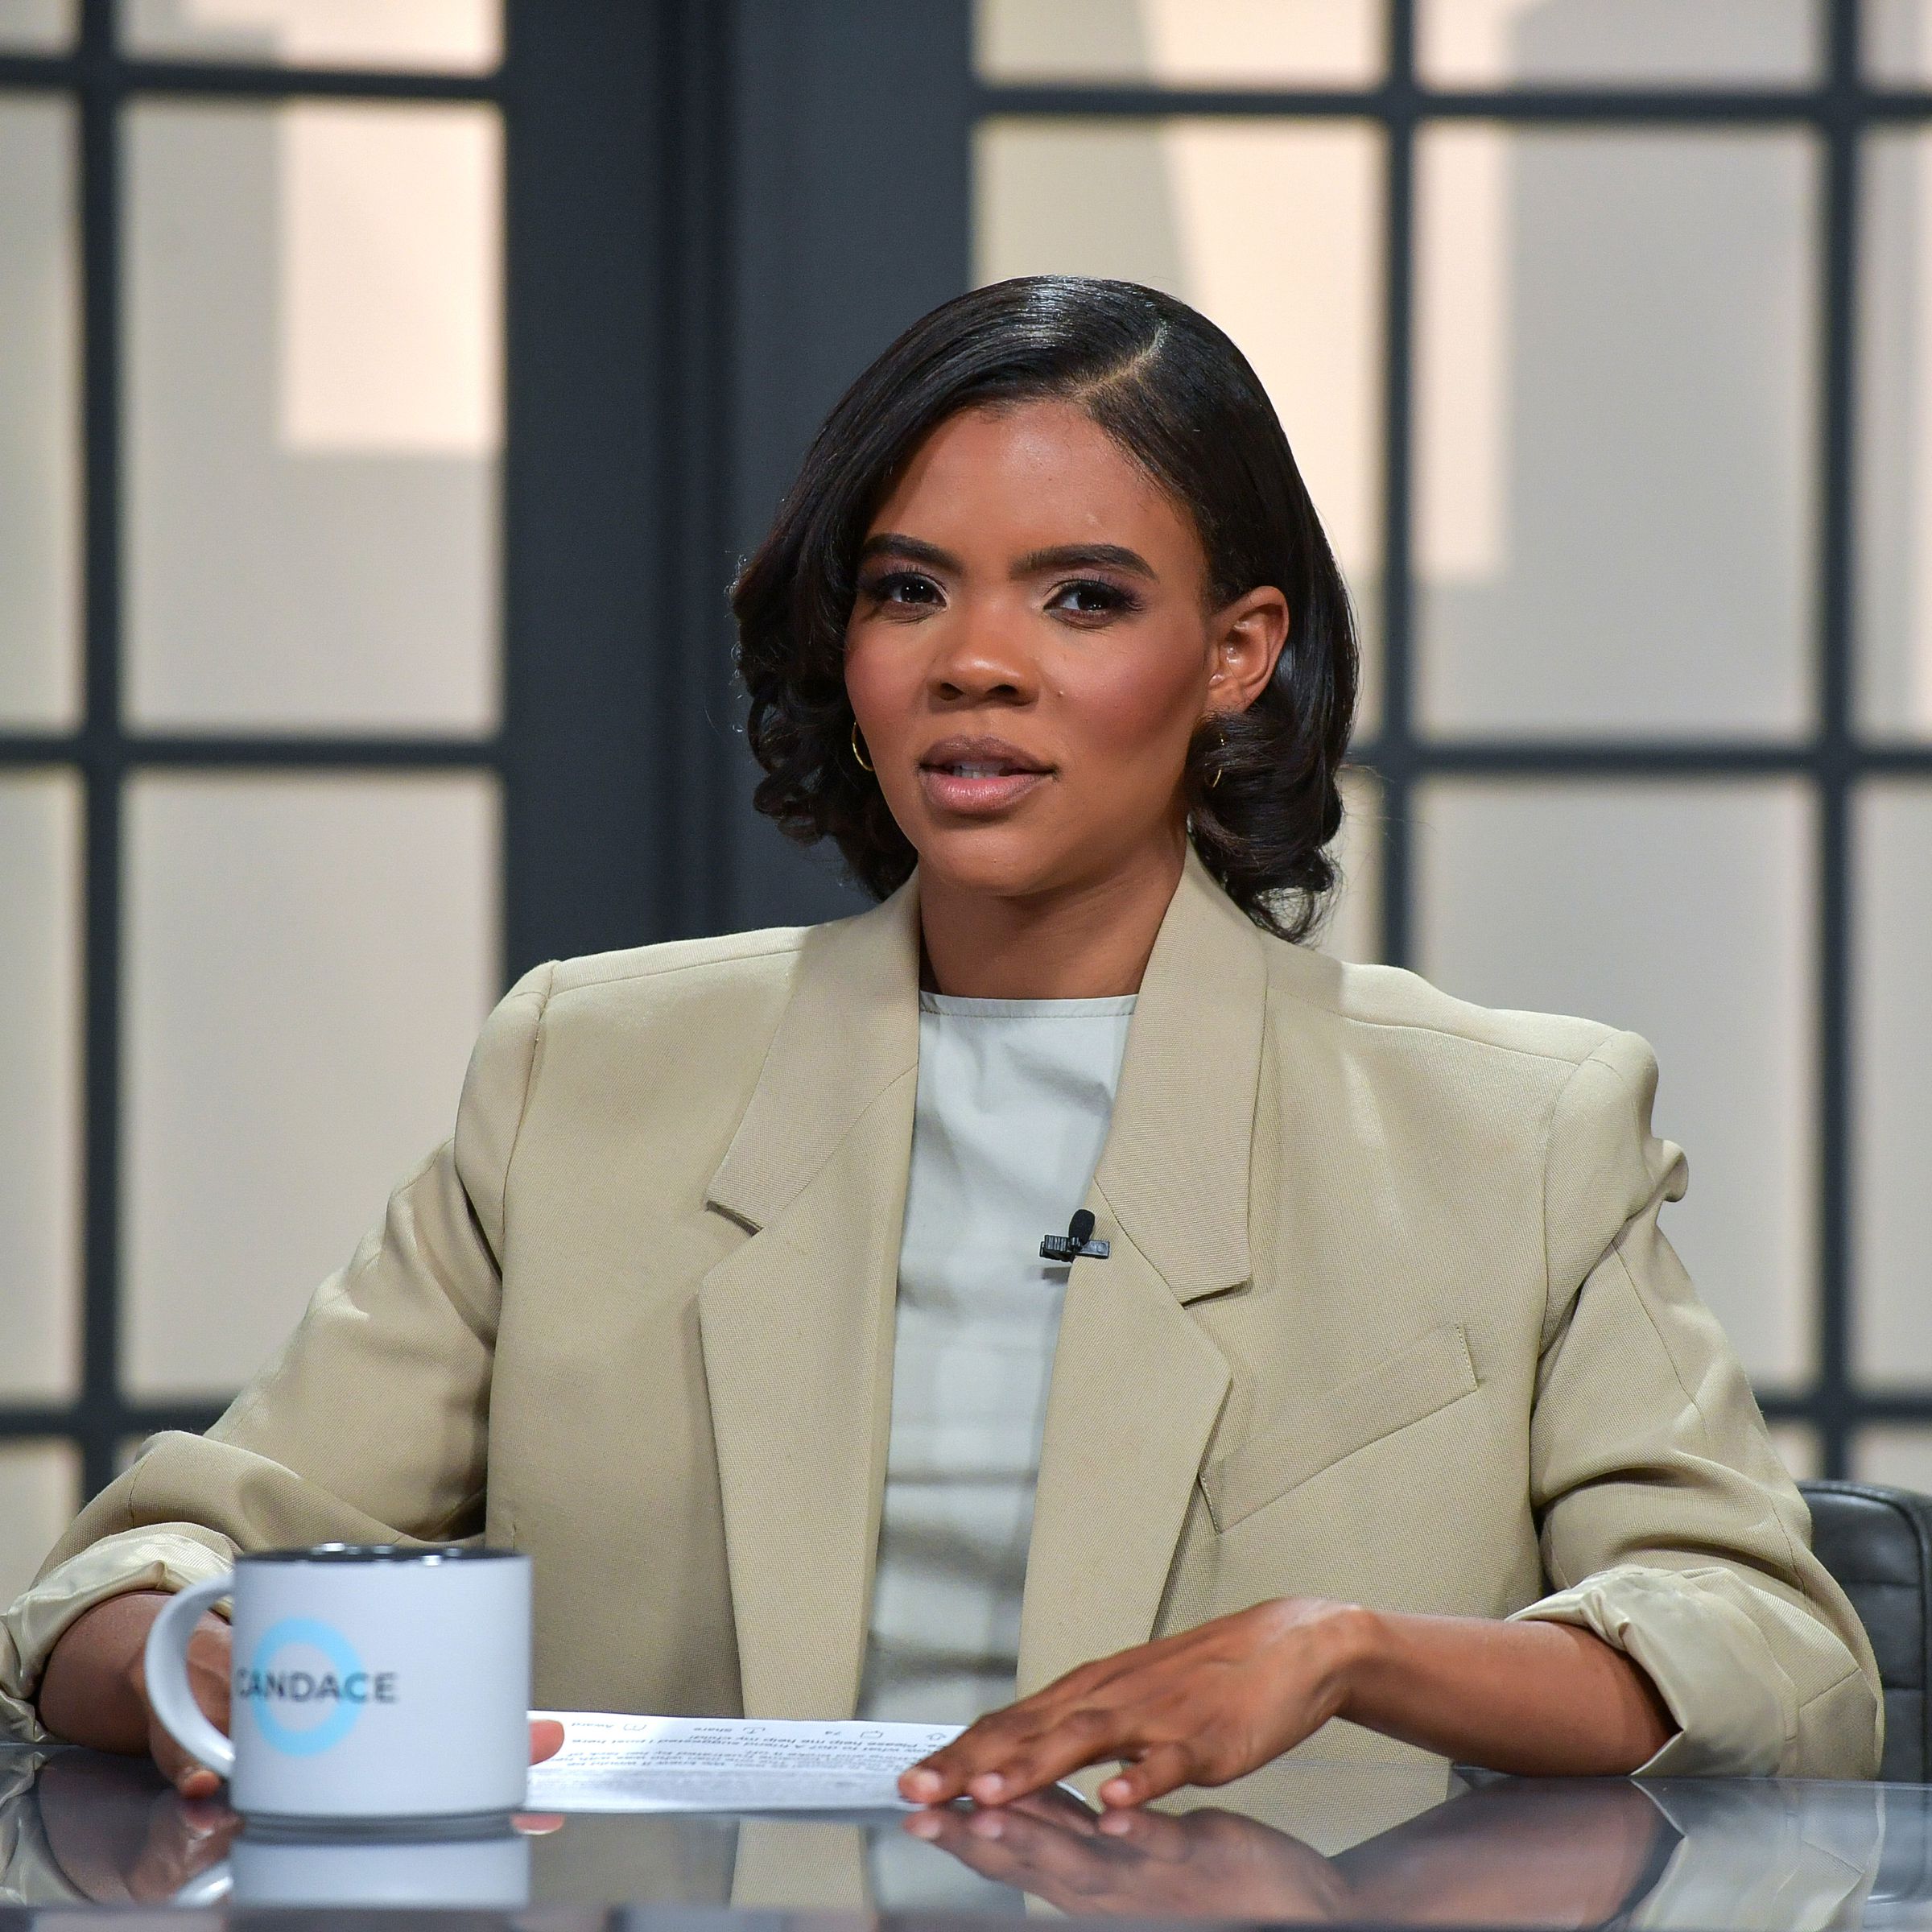 “Candace” Hosted By Candace Owens